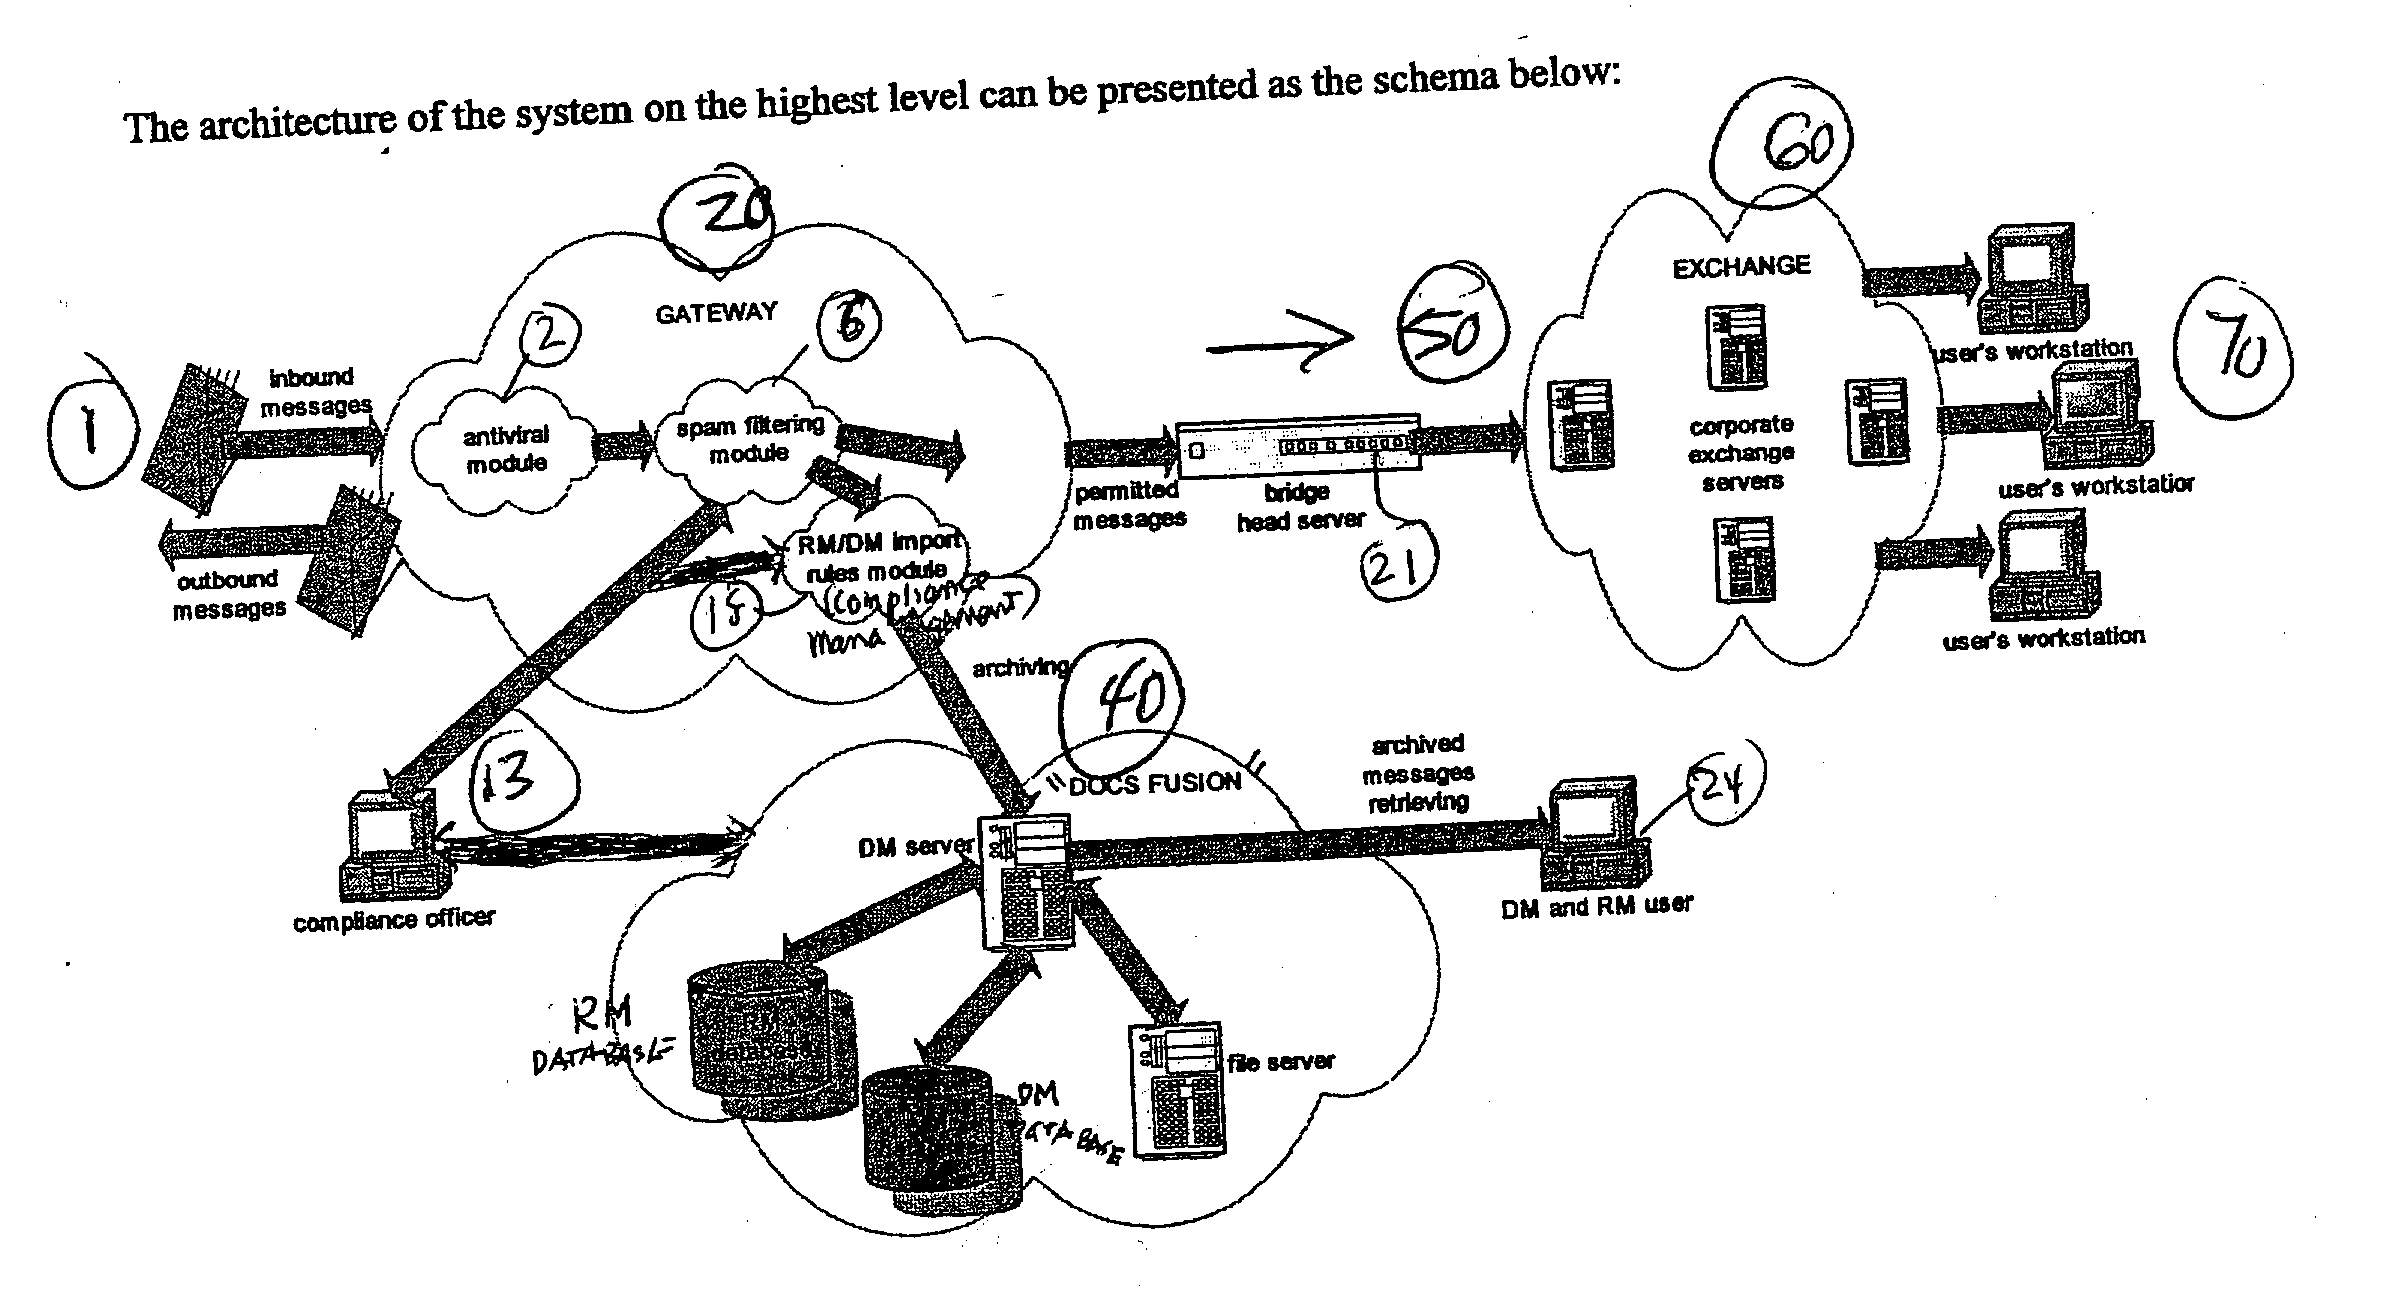 Method of and universal apparatus and module for automatically managing electronic communications, such as e-mail and the like, to enable integrity assurance thereof and real-time compliance with pre-established regulatory requirements as promulgated in government and other compliance database files and information websites, and the like